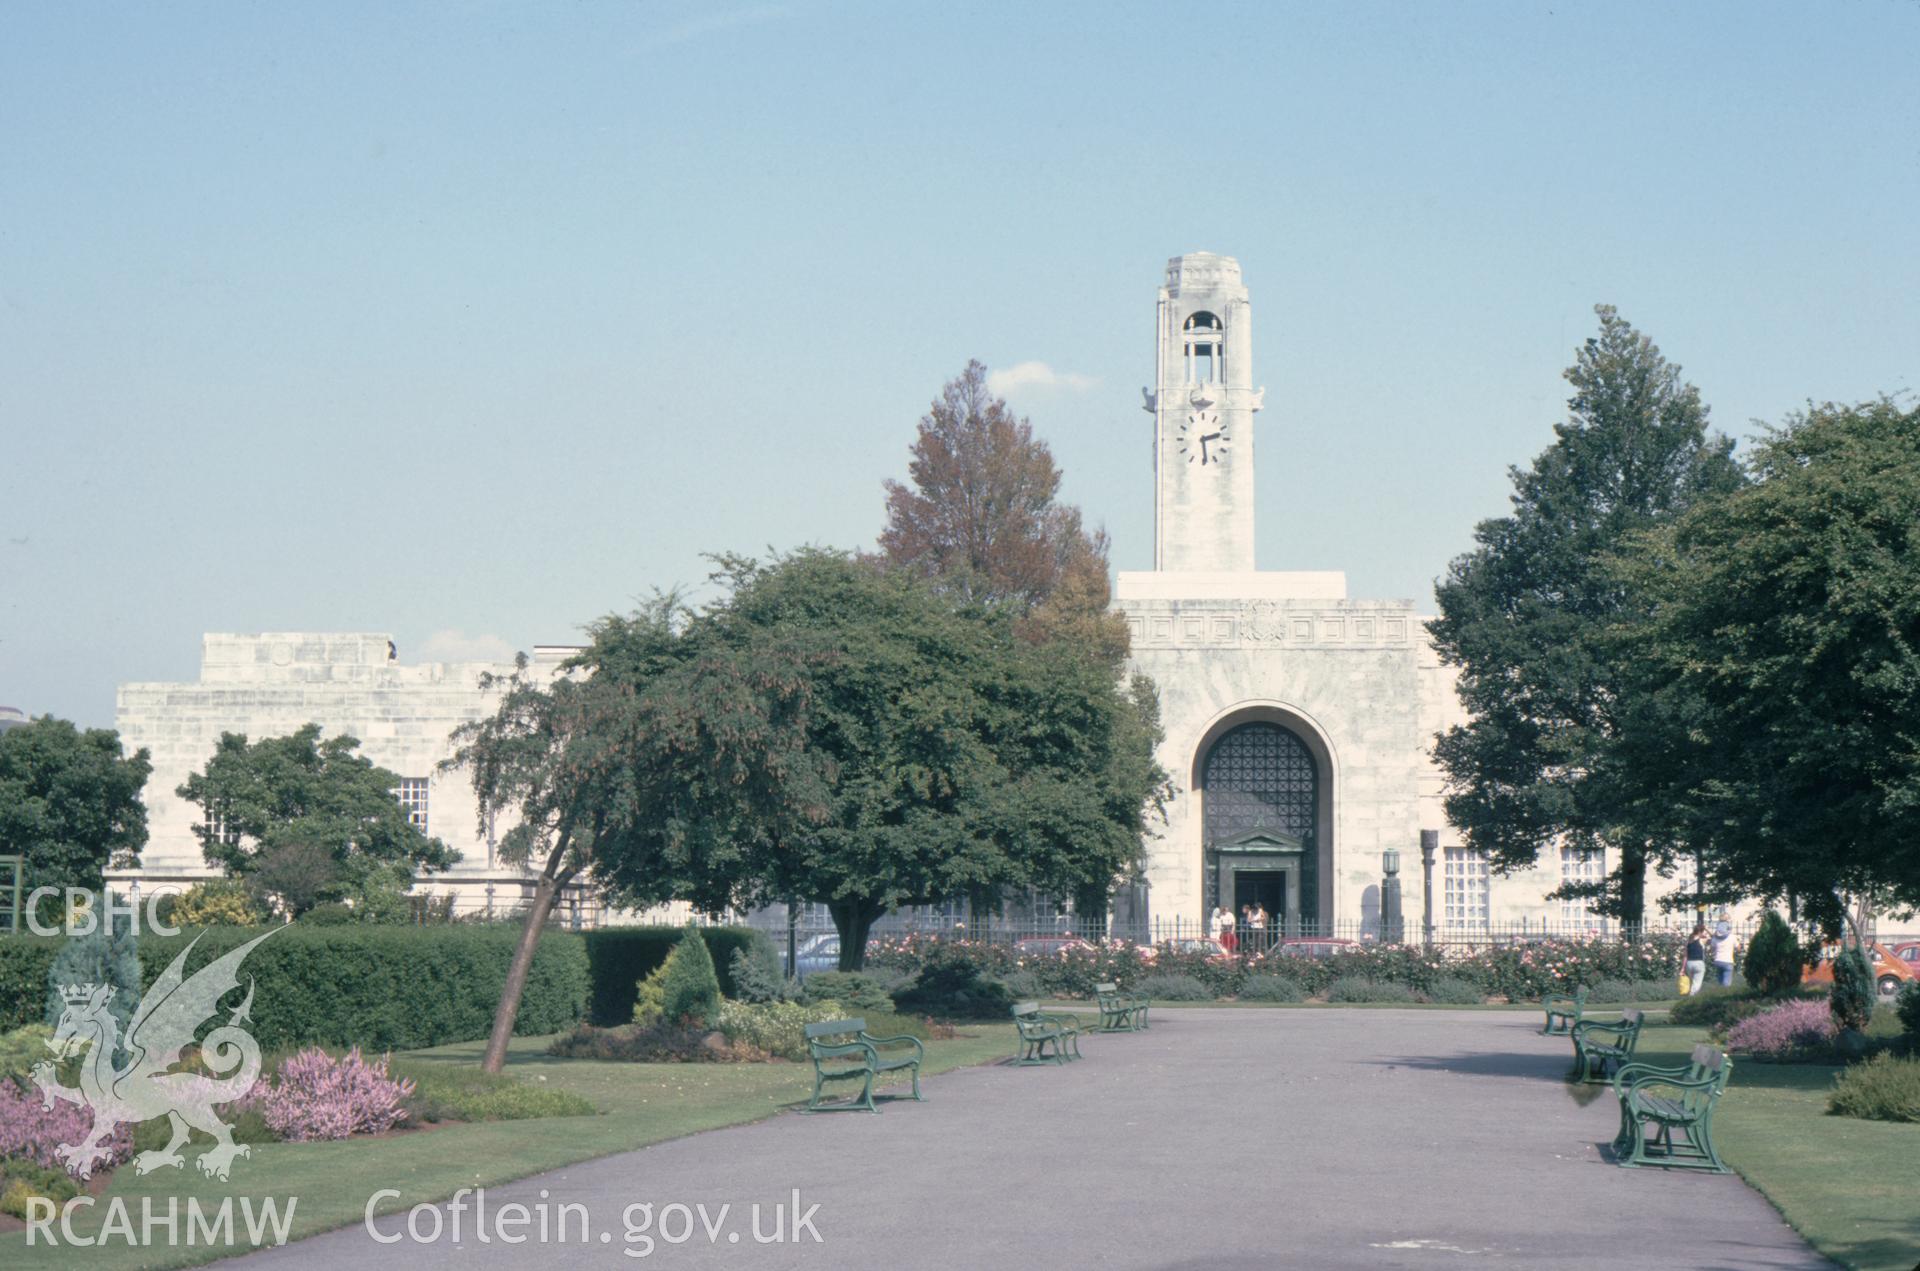 Colour photographic transparency showing view of Swansea Guildhall; collated by the former Central Office of Information.